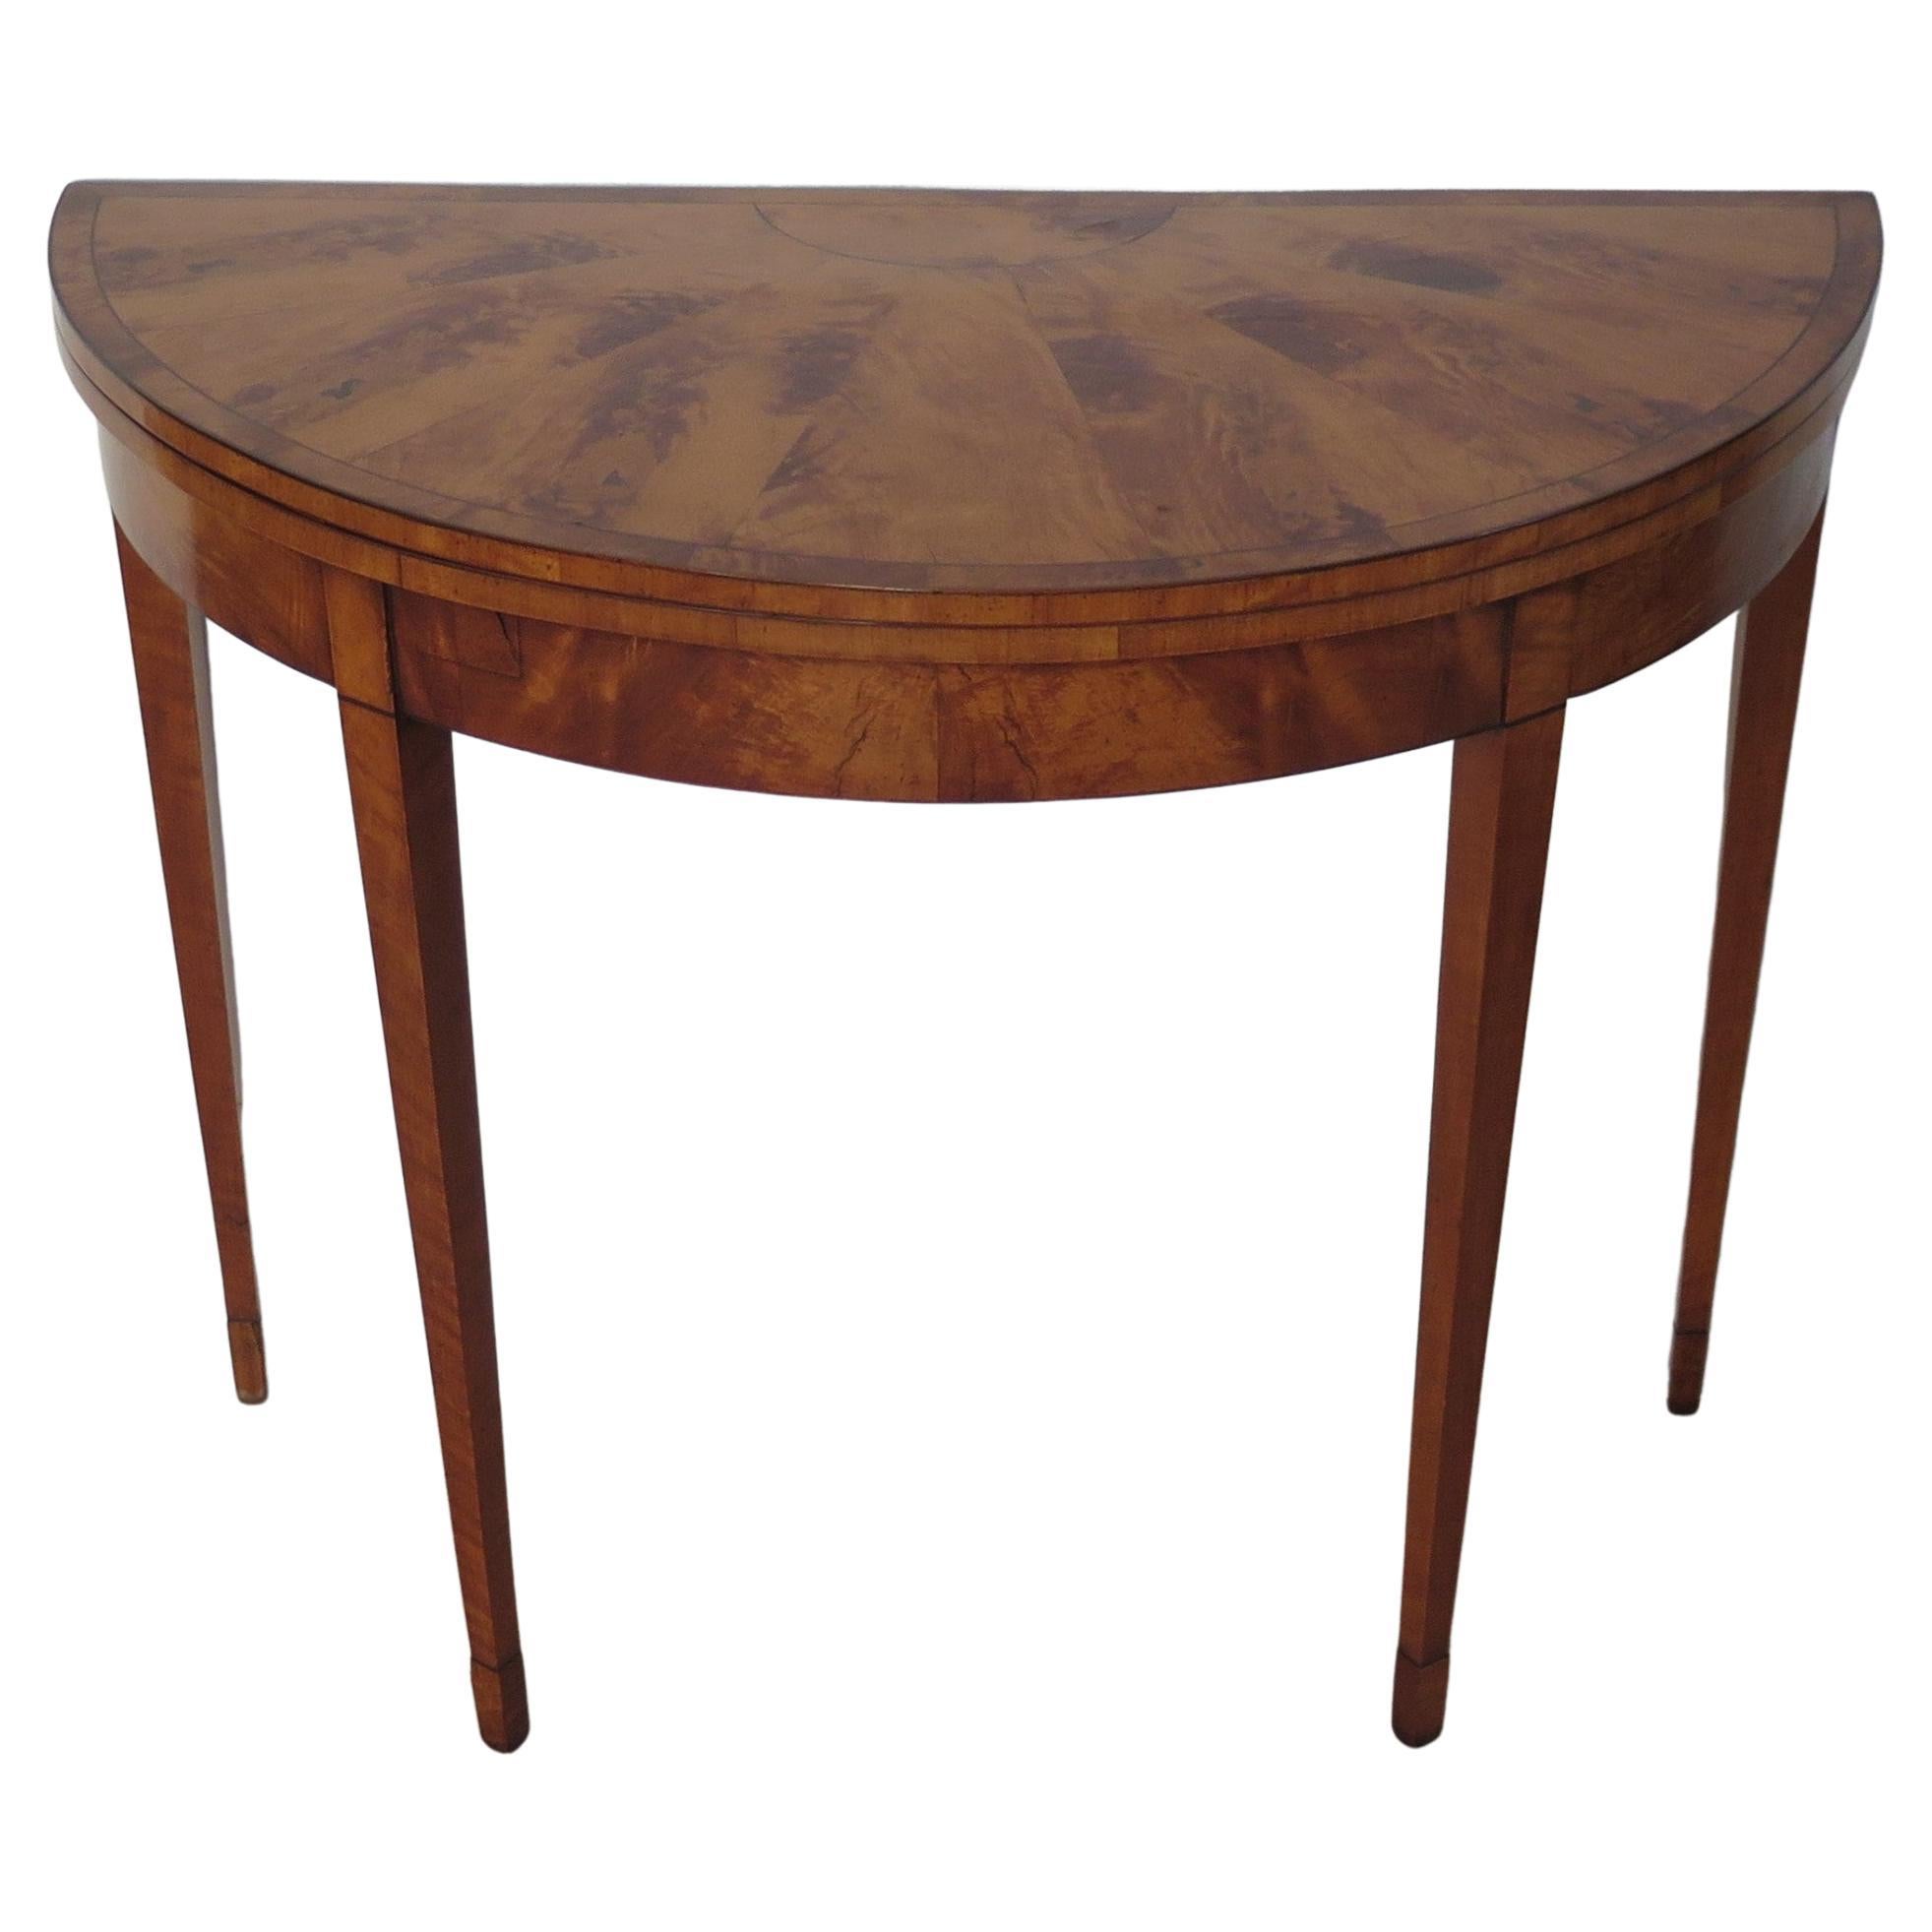 George 111rd Card Table Demi-Lune Satinwood, Sheraton Period circa 1790 For Sale